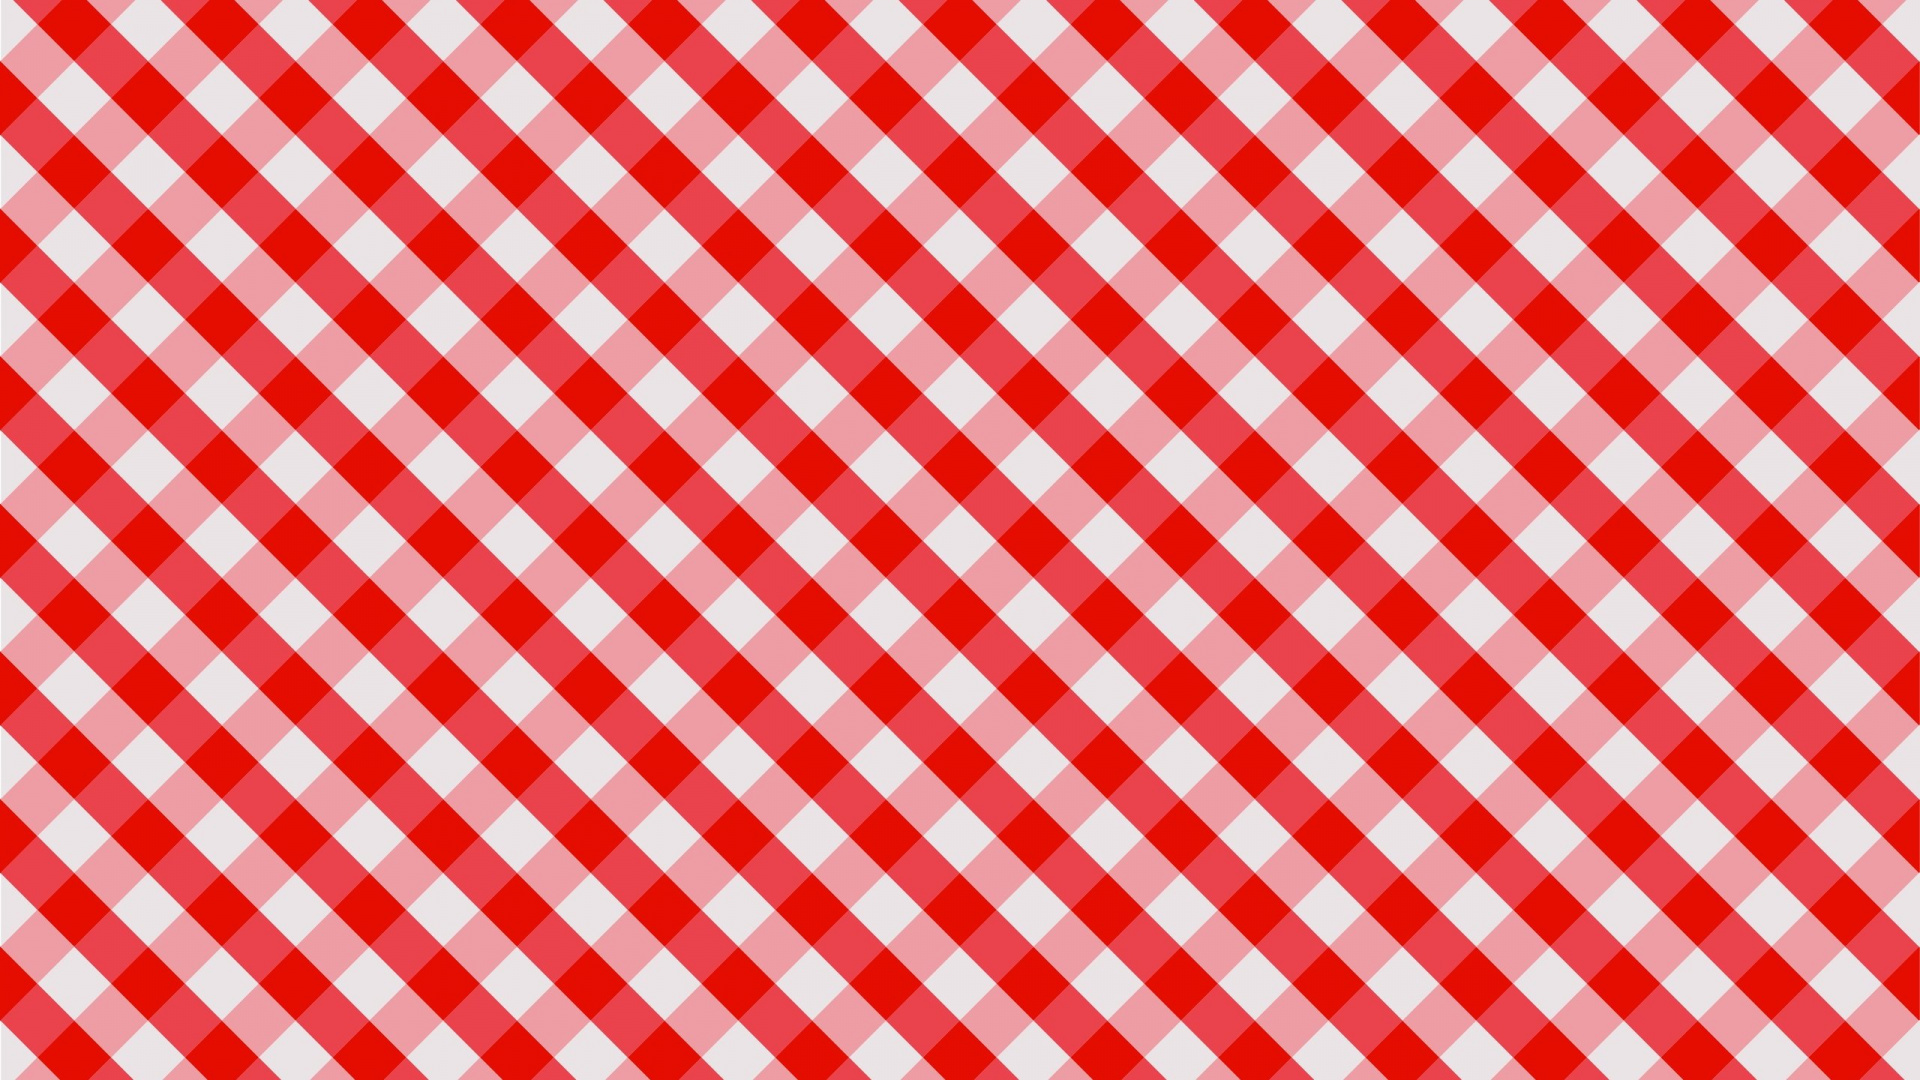 Red and White Checkered Textile. Wallpaper in 1920x1080 Resolution